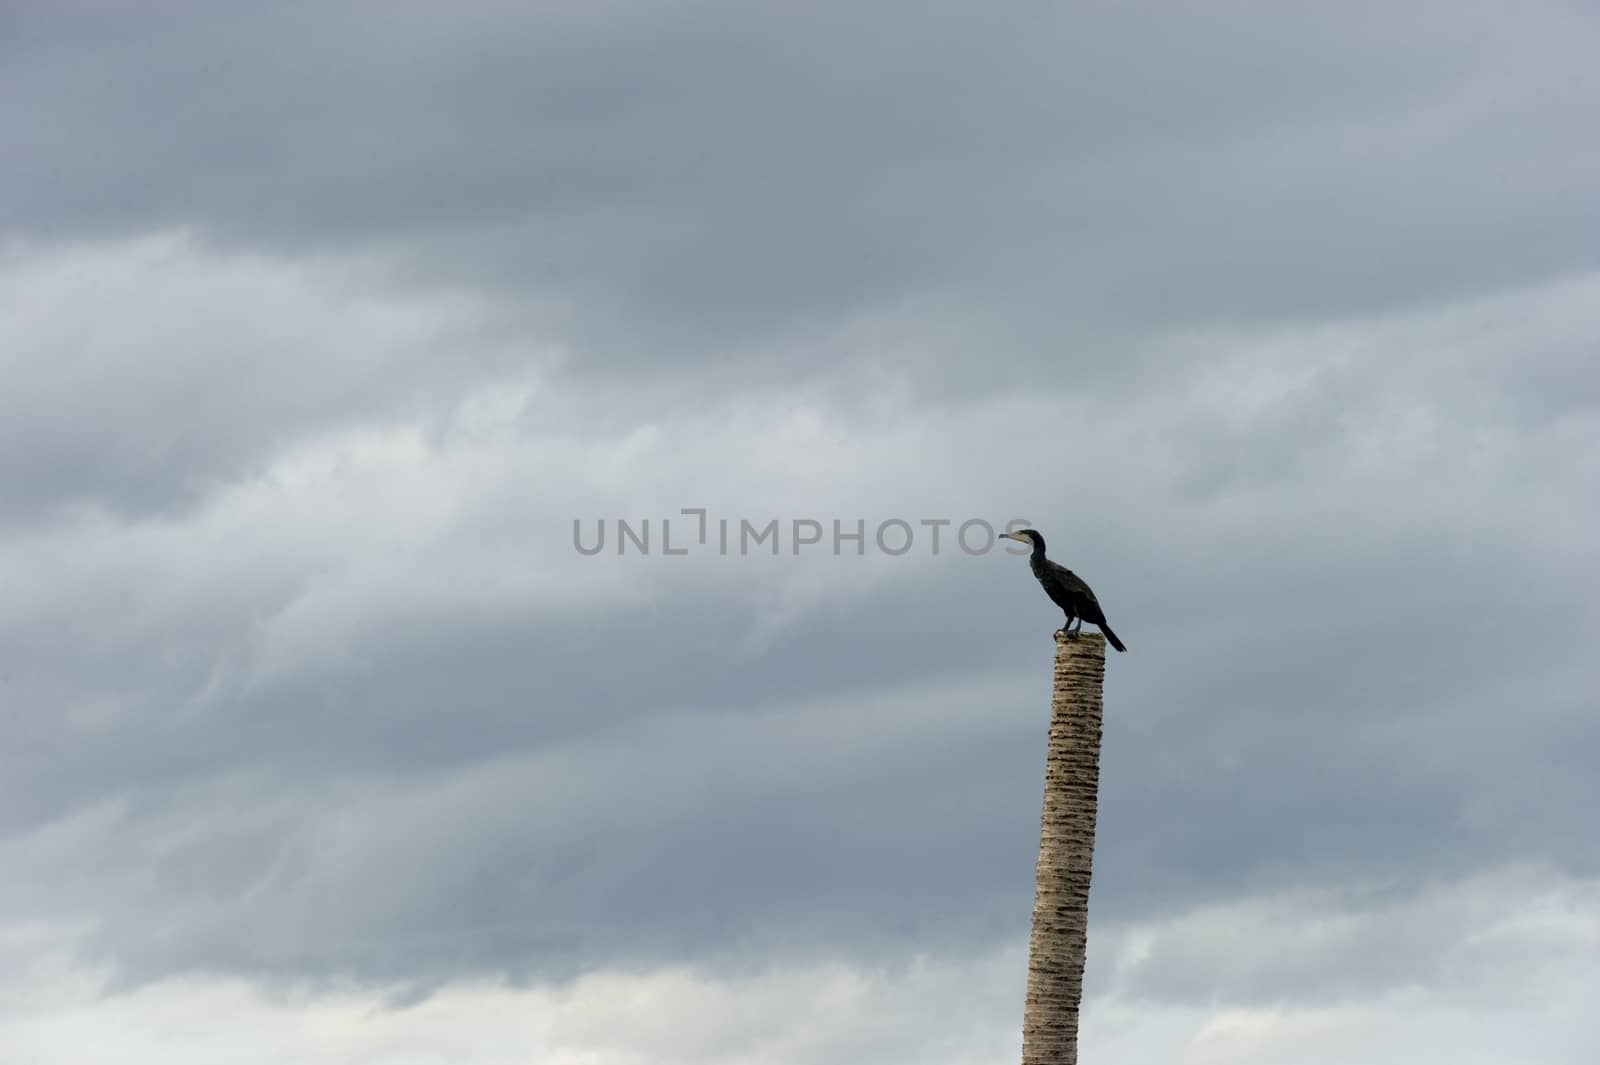 Great Cormorant resting after fishing, Samutsakorn,Thailand. by think4photop